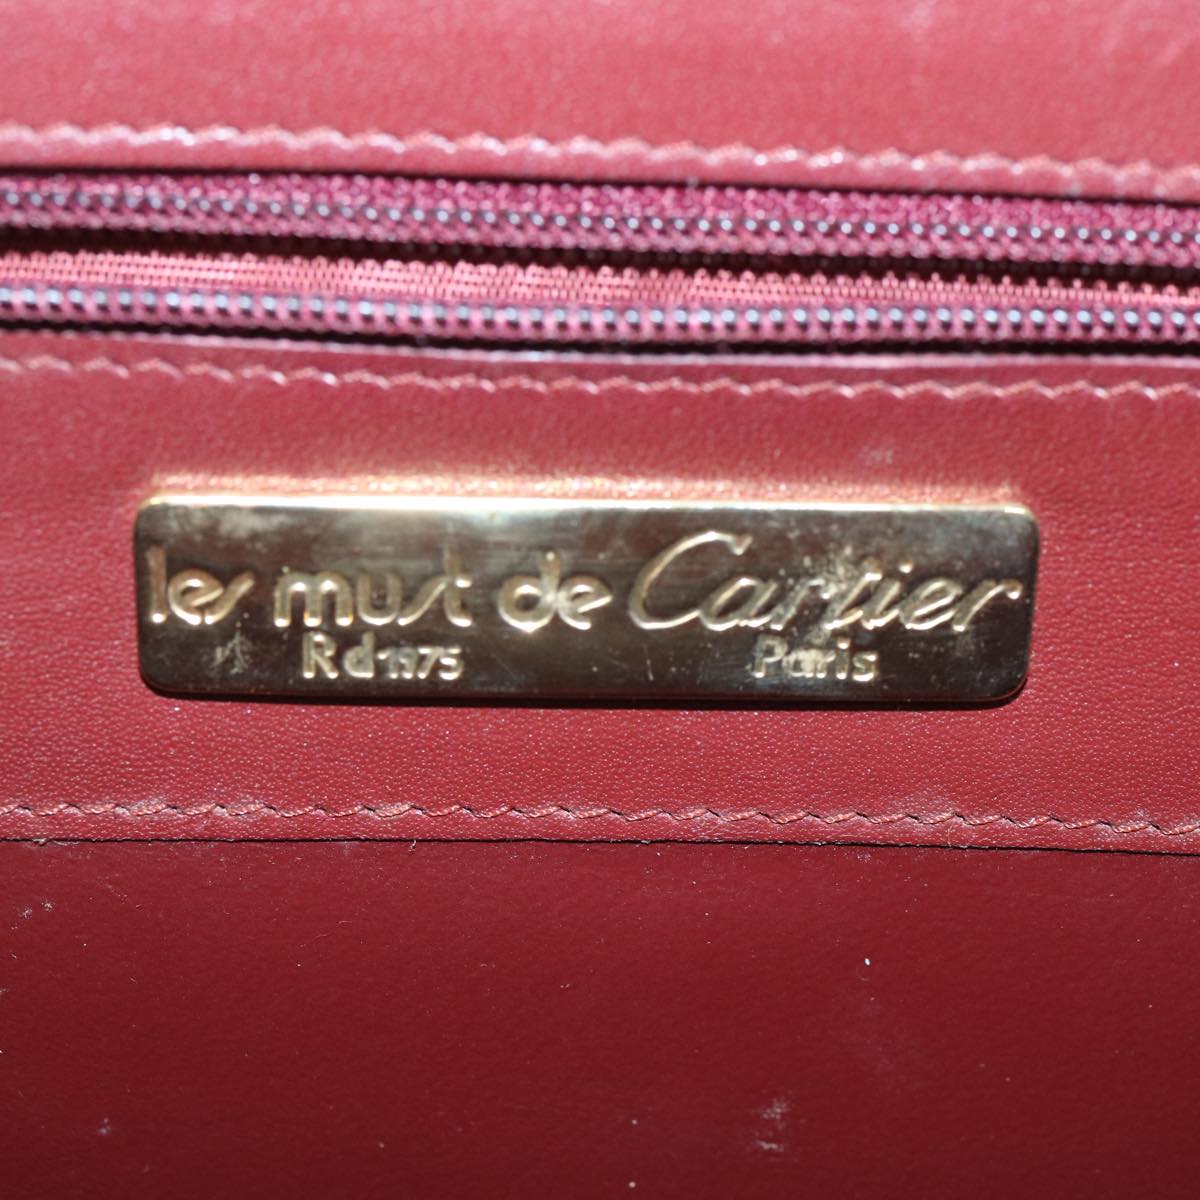 CARTIER Shoulder Bag Leather Wine Red Auth bs12128